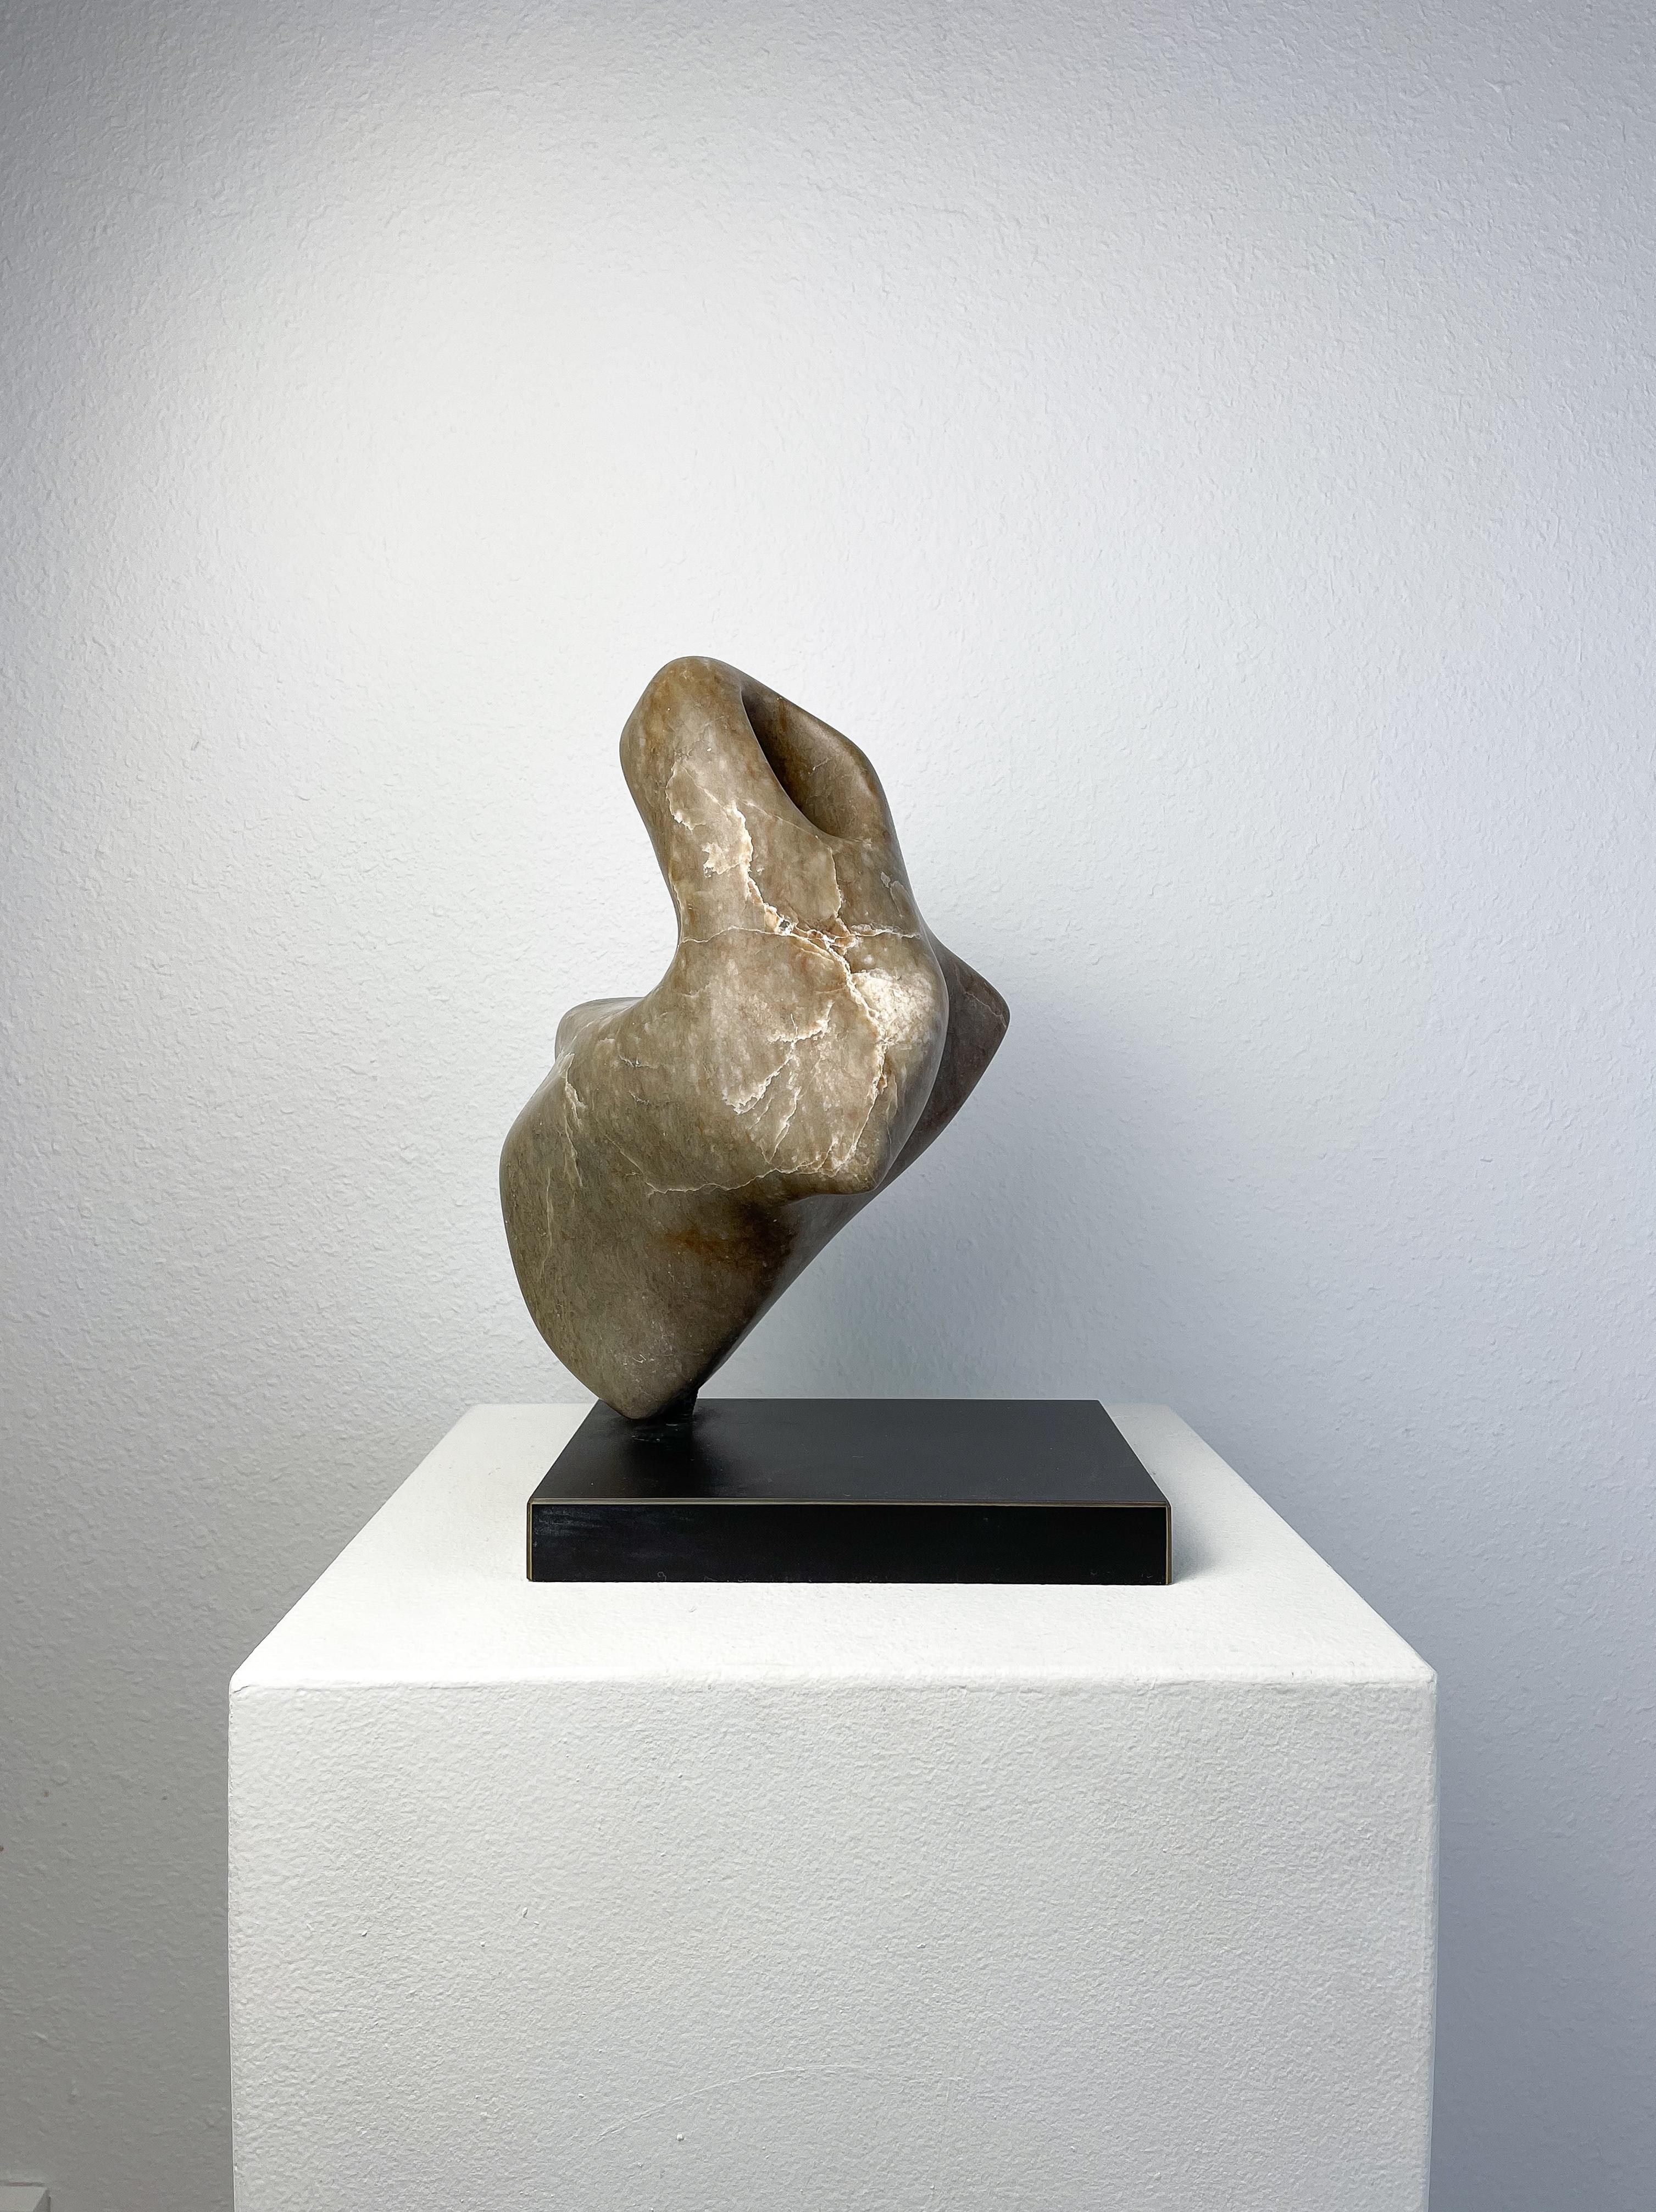 Rare marble sculpture by Antoine Poncet which includes great ephemera from artist to client in the U.S. Included with Sculpture is a signed personal letter from Antoine Poncet, Book and his business card all dated 1970. 

Poncet is a Swiss artist